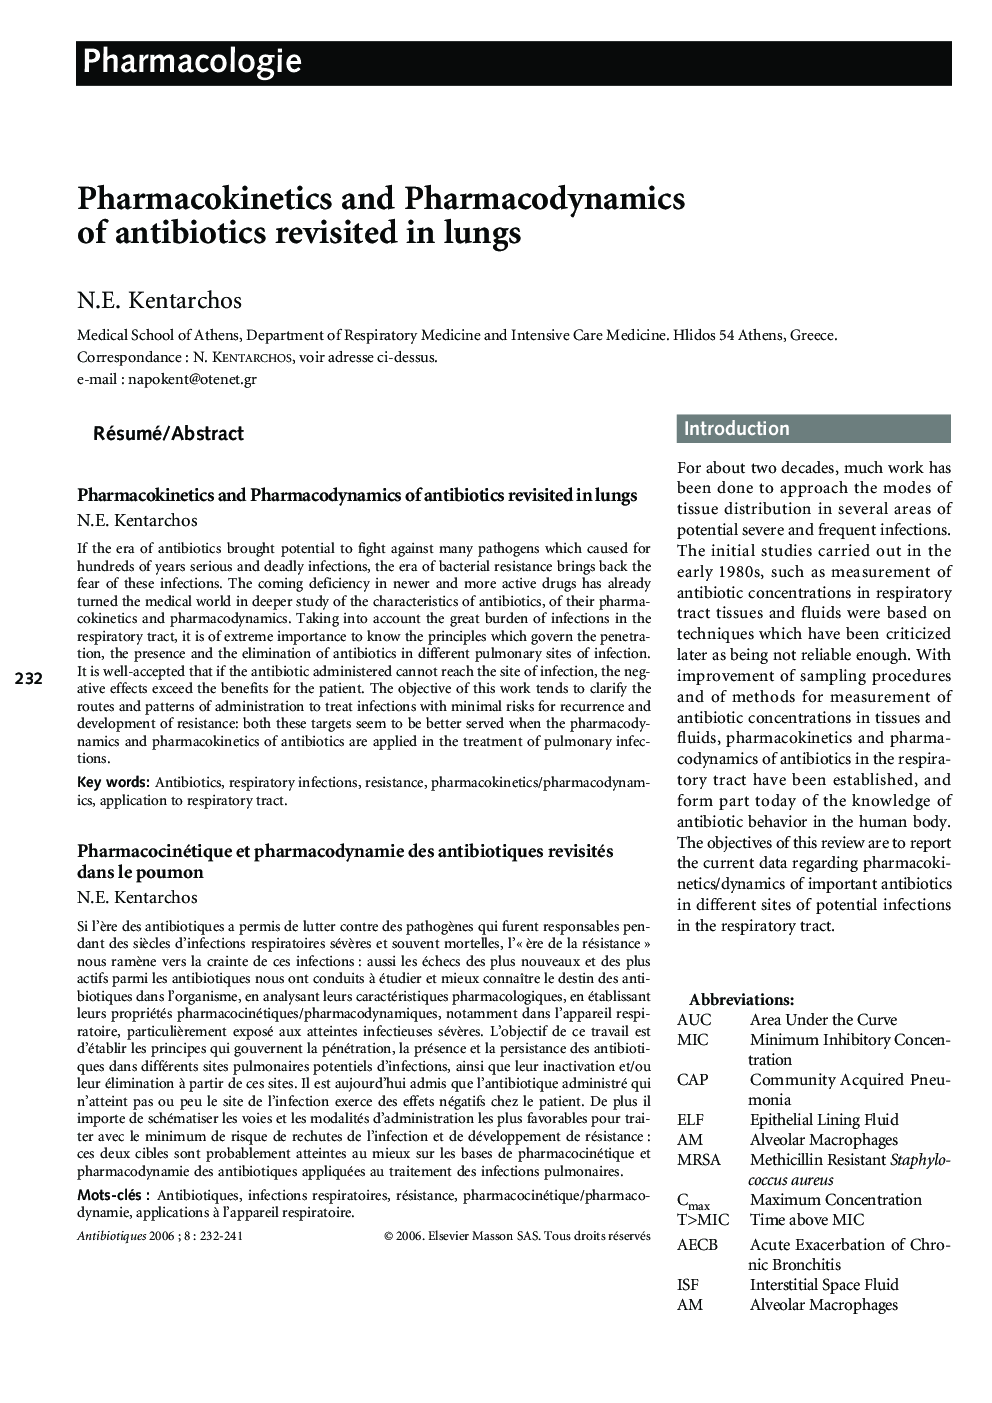 Pharmacokinetics and pharmacodynamics of antibiotics revisited in lungs